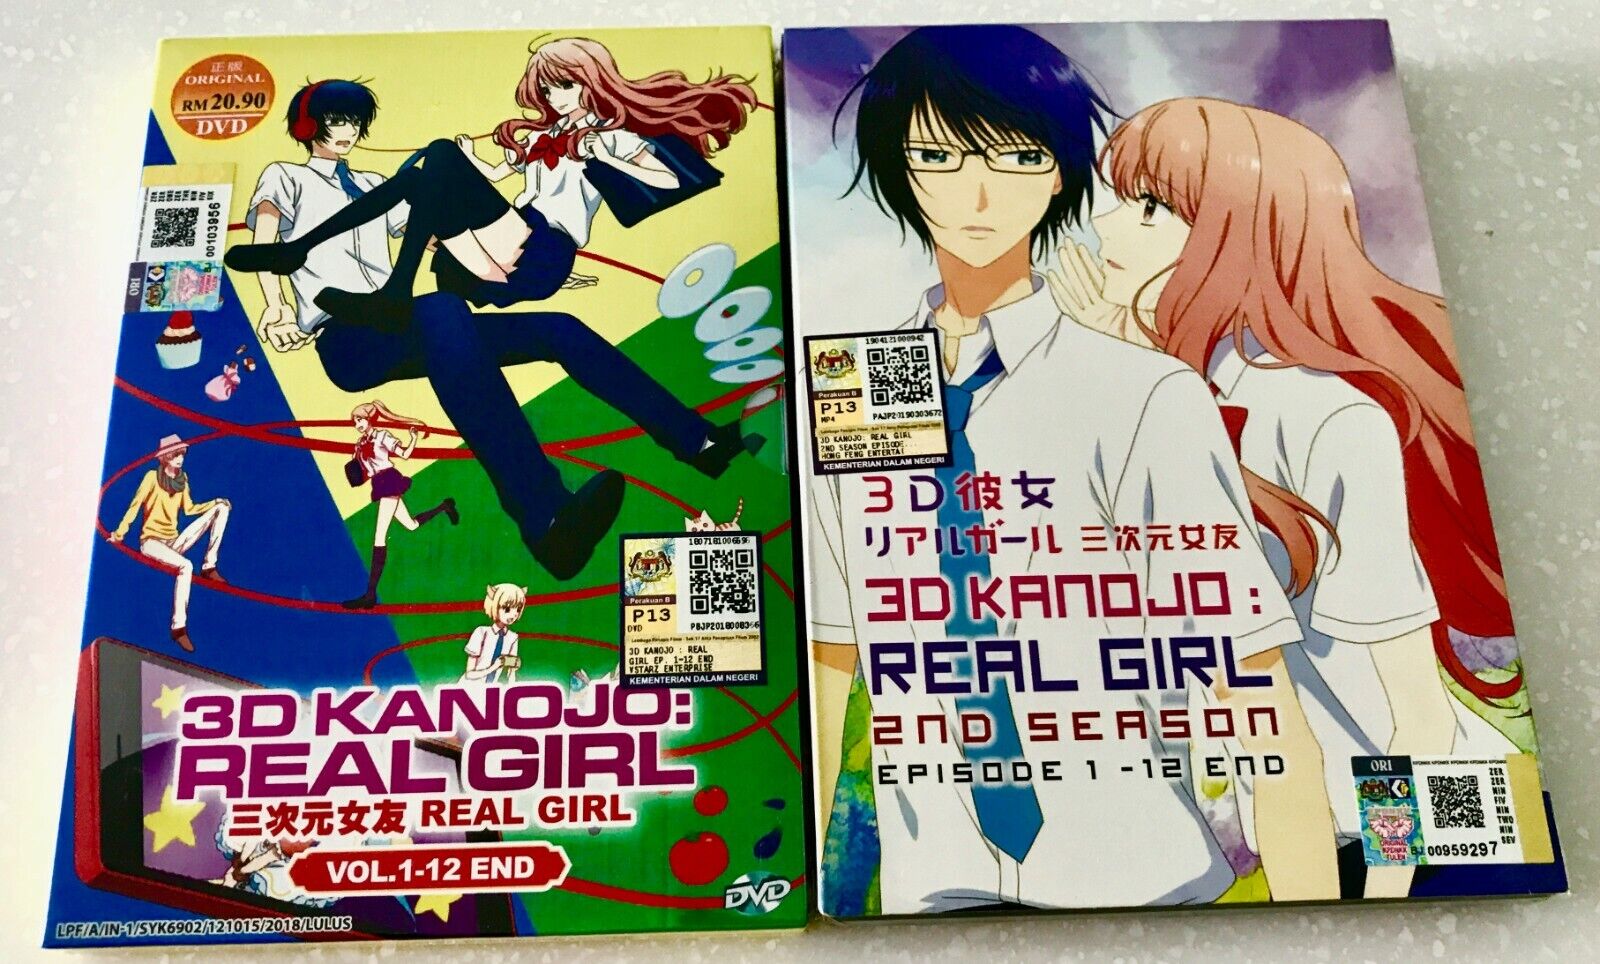 3D Kanojo: Real Girl (VOL.1 - 24 End) ~ All Region ~ Brand New